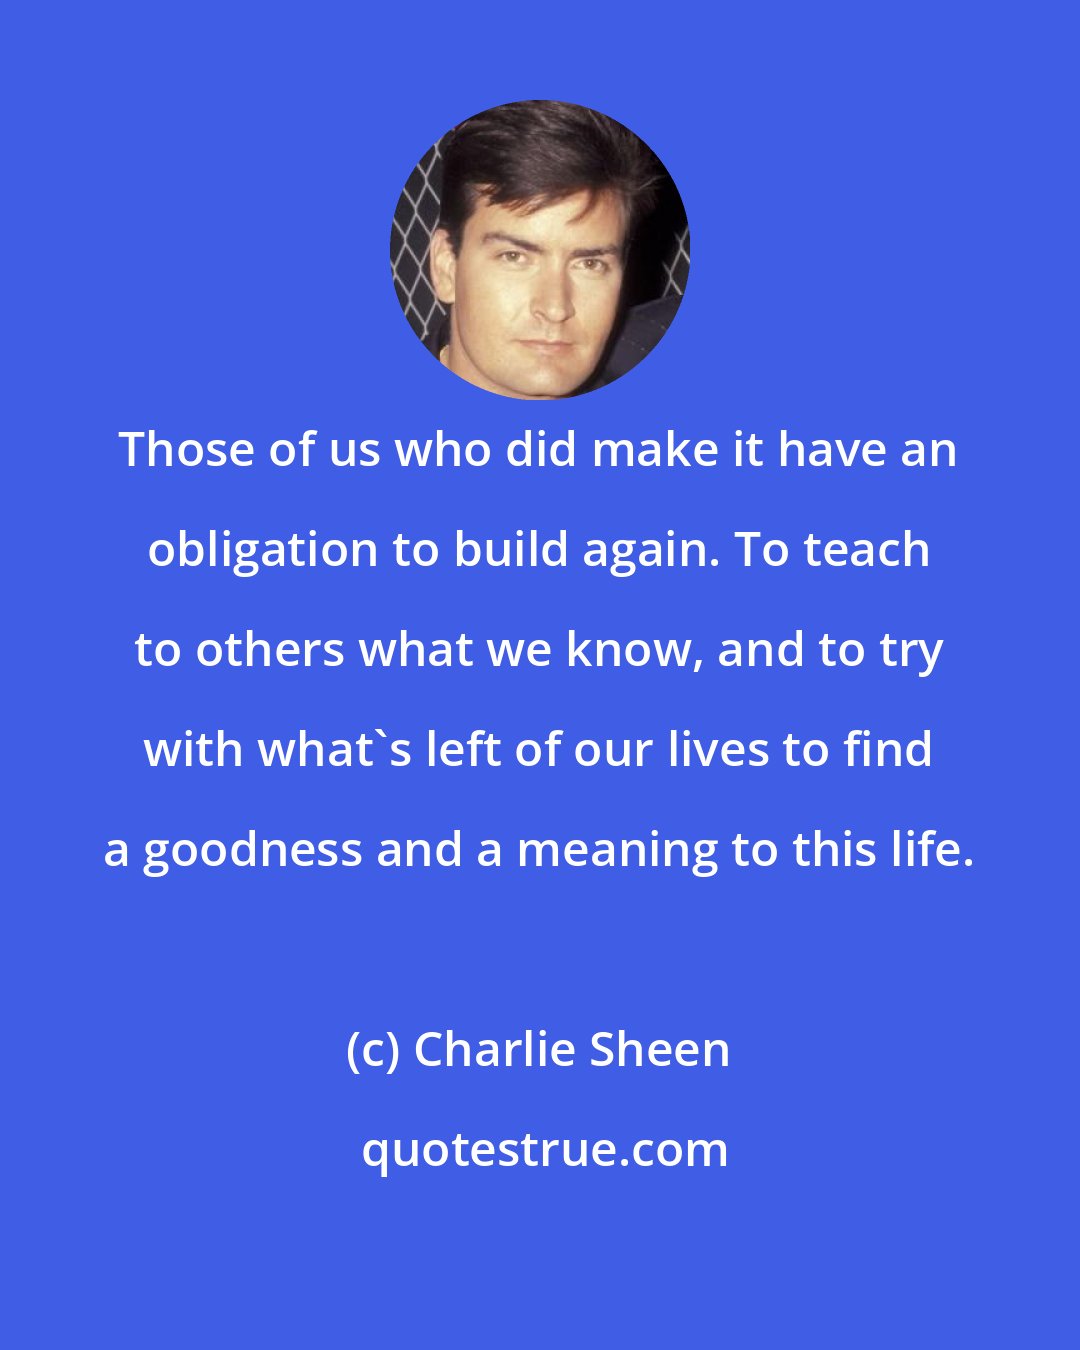 Charlie Sheen: Those of us who did make it have an obligation to build again. To teach to others what we know, and to try with what's left of our lives to find a goodness and a meaning to this life.